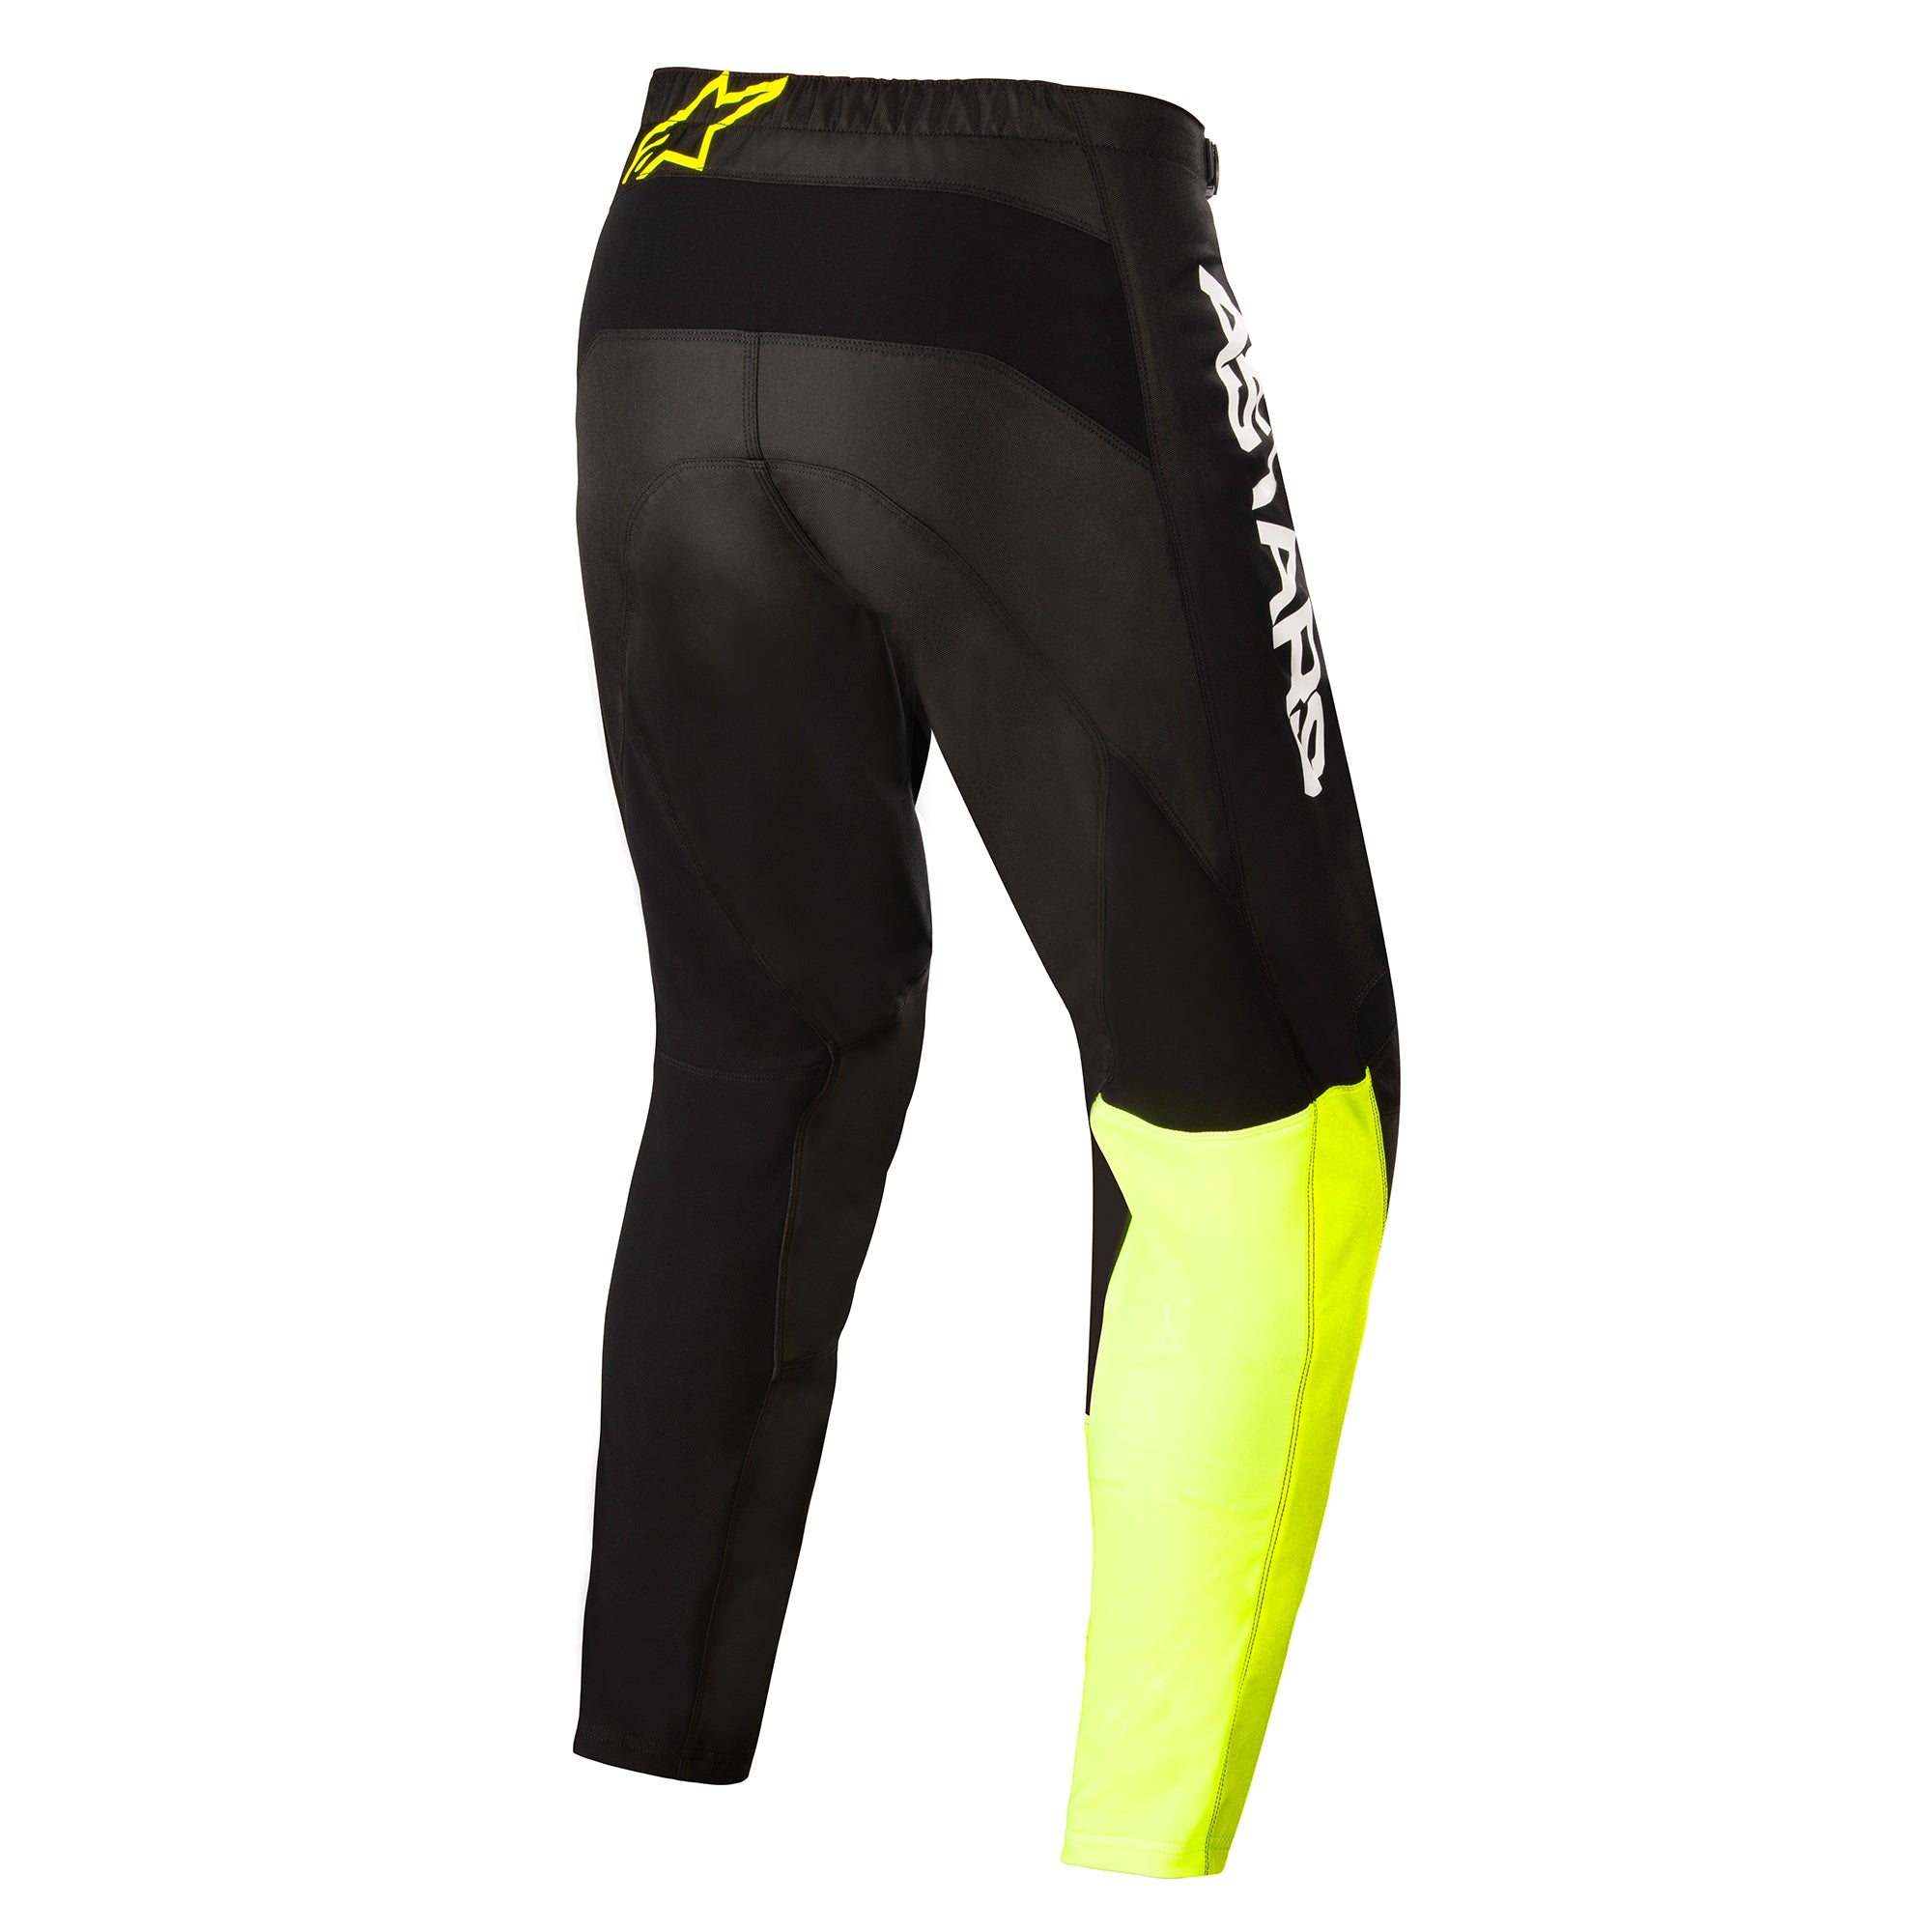 2022 Youth Racer Chaser Pants